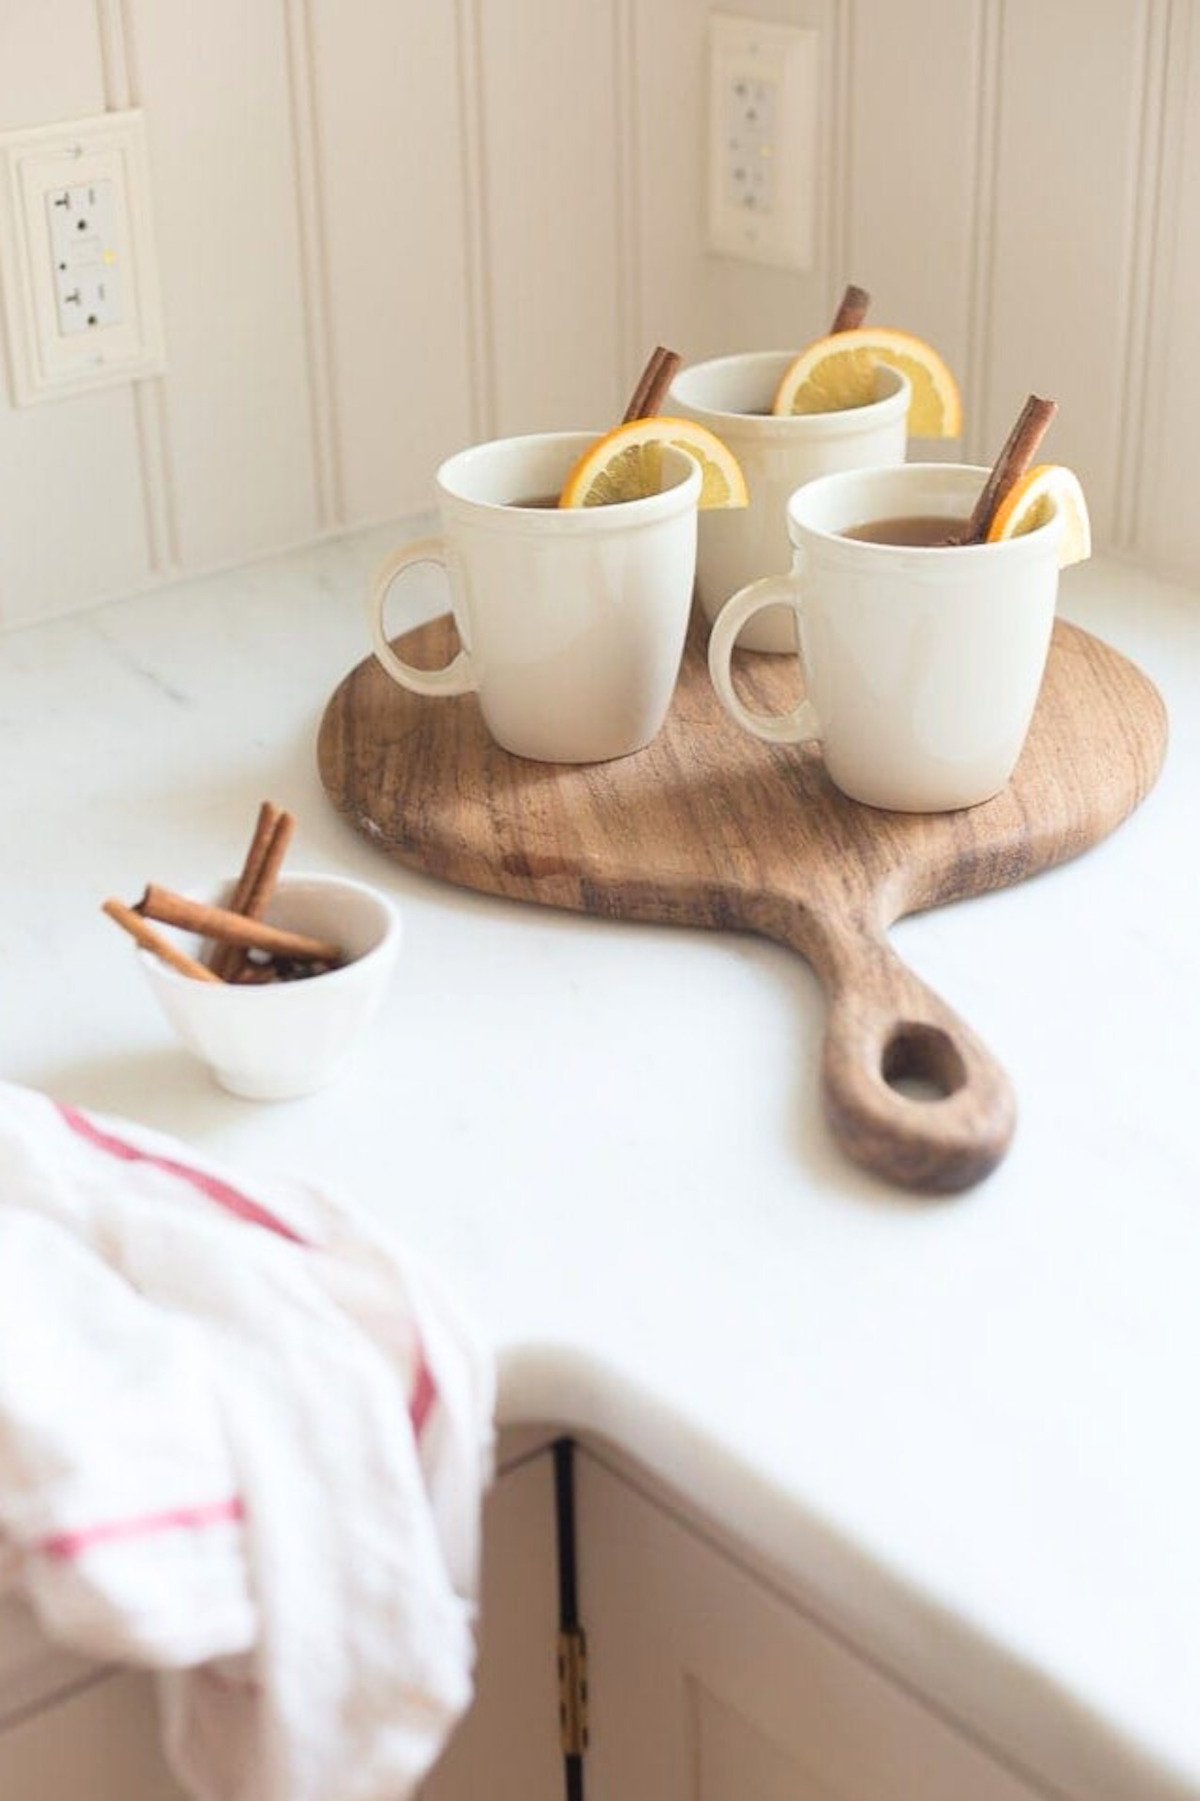 Three white mugs filled with spiked apple cider, each garnished with a cinnamon stick and a lemon slice, placed on a wooden board. A small bowl with extra cinnamon sticks and a cloth are beside them.